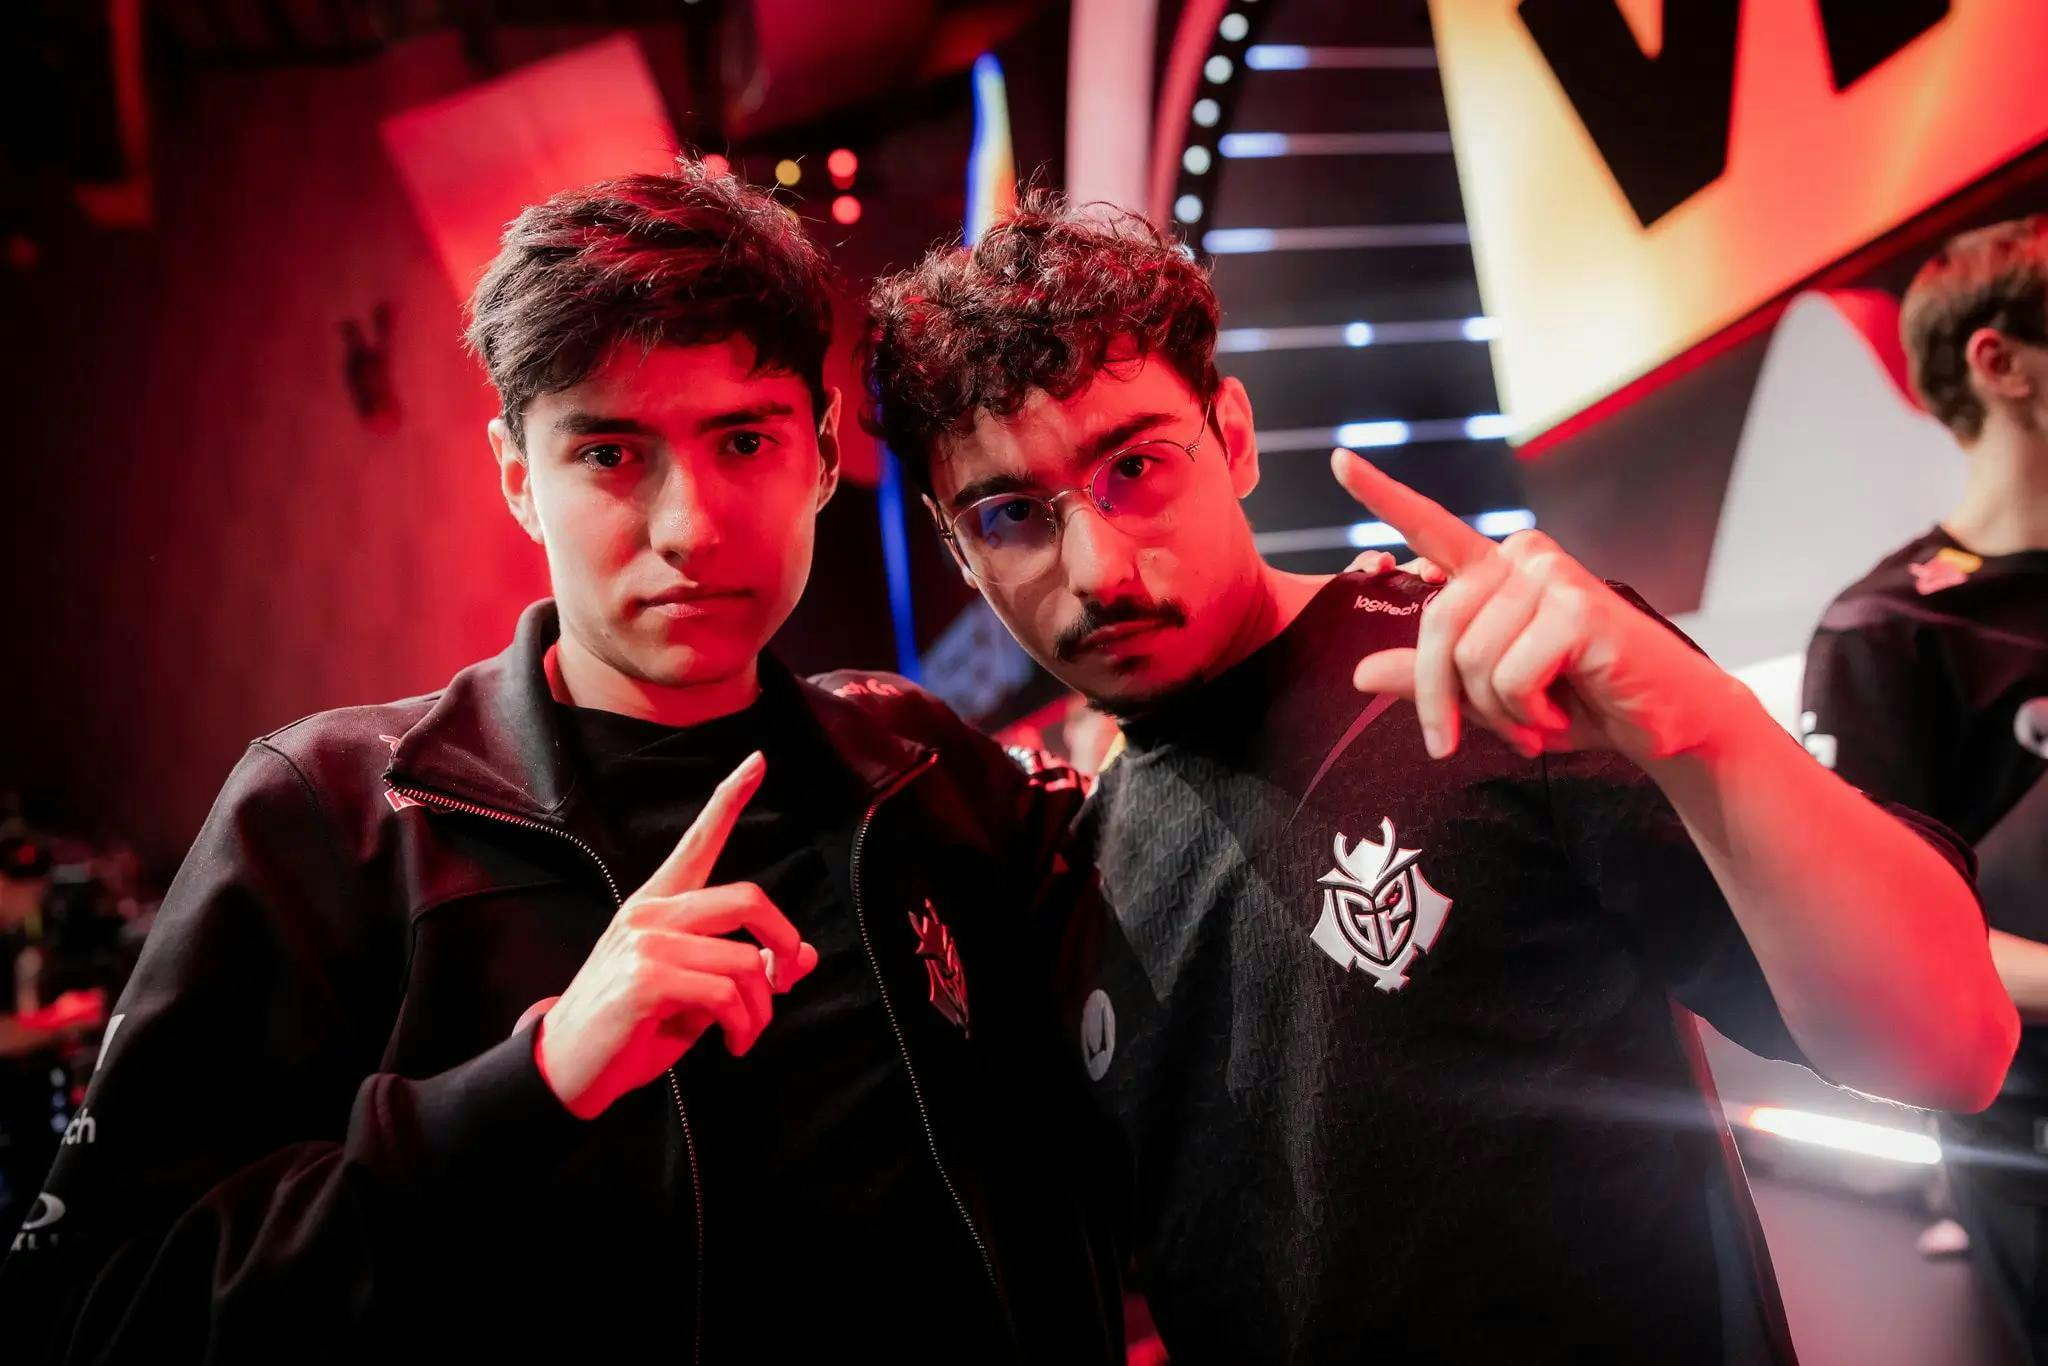 BrokenBlade and Yike, posing after their victory. Credit: Colin Young-Wolff/Riot Games